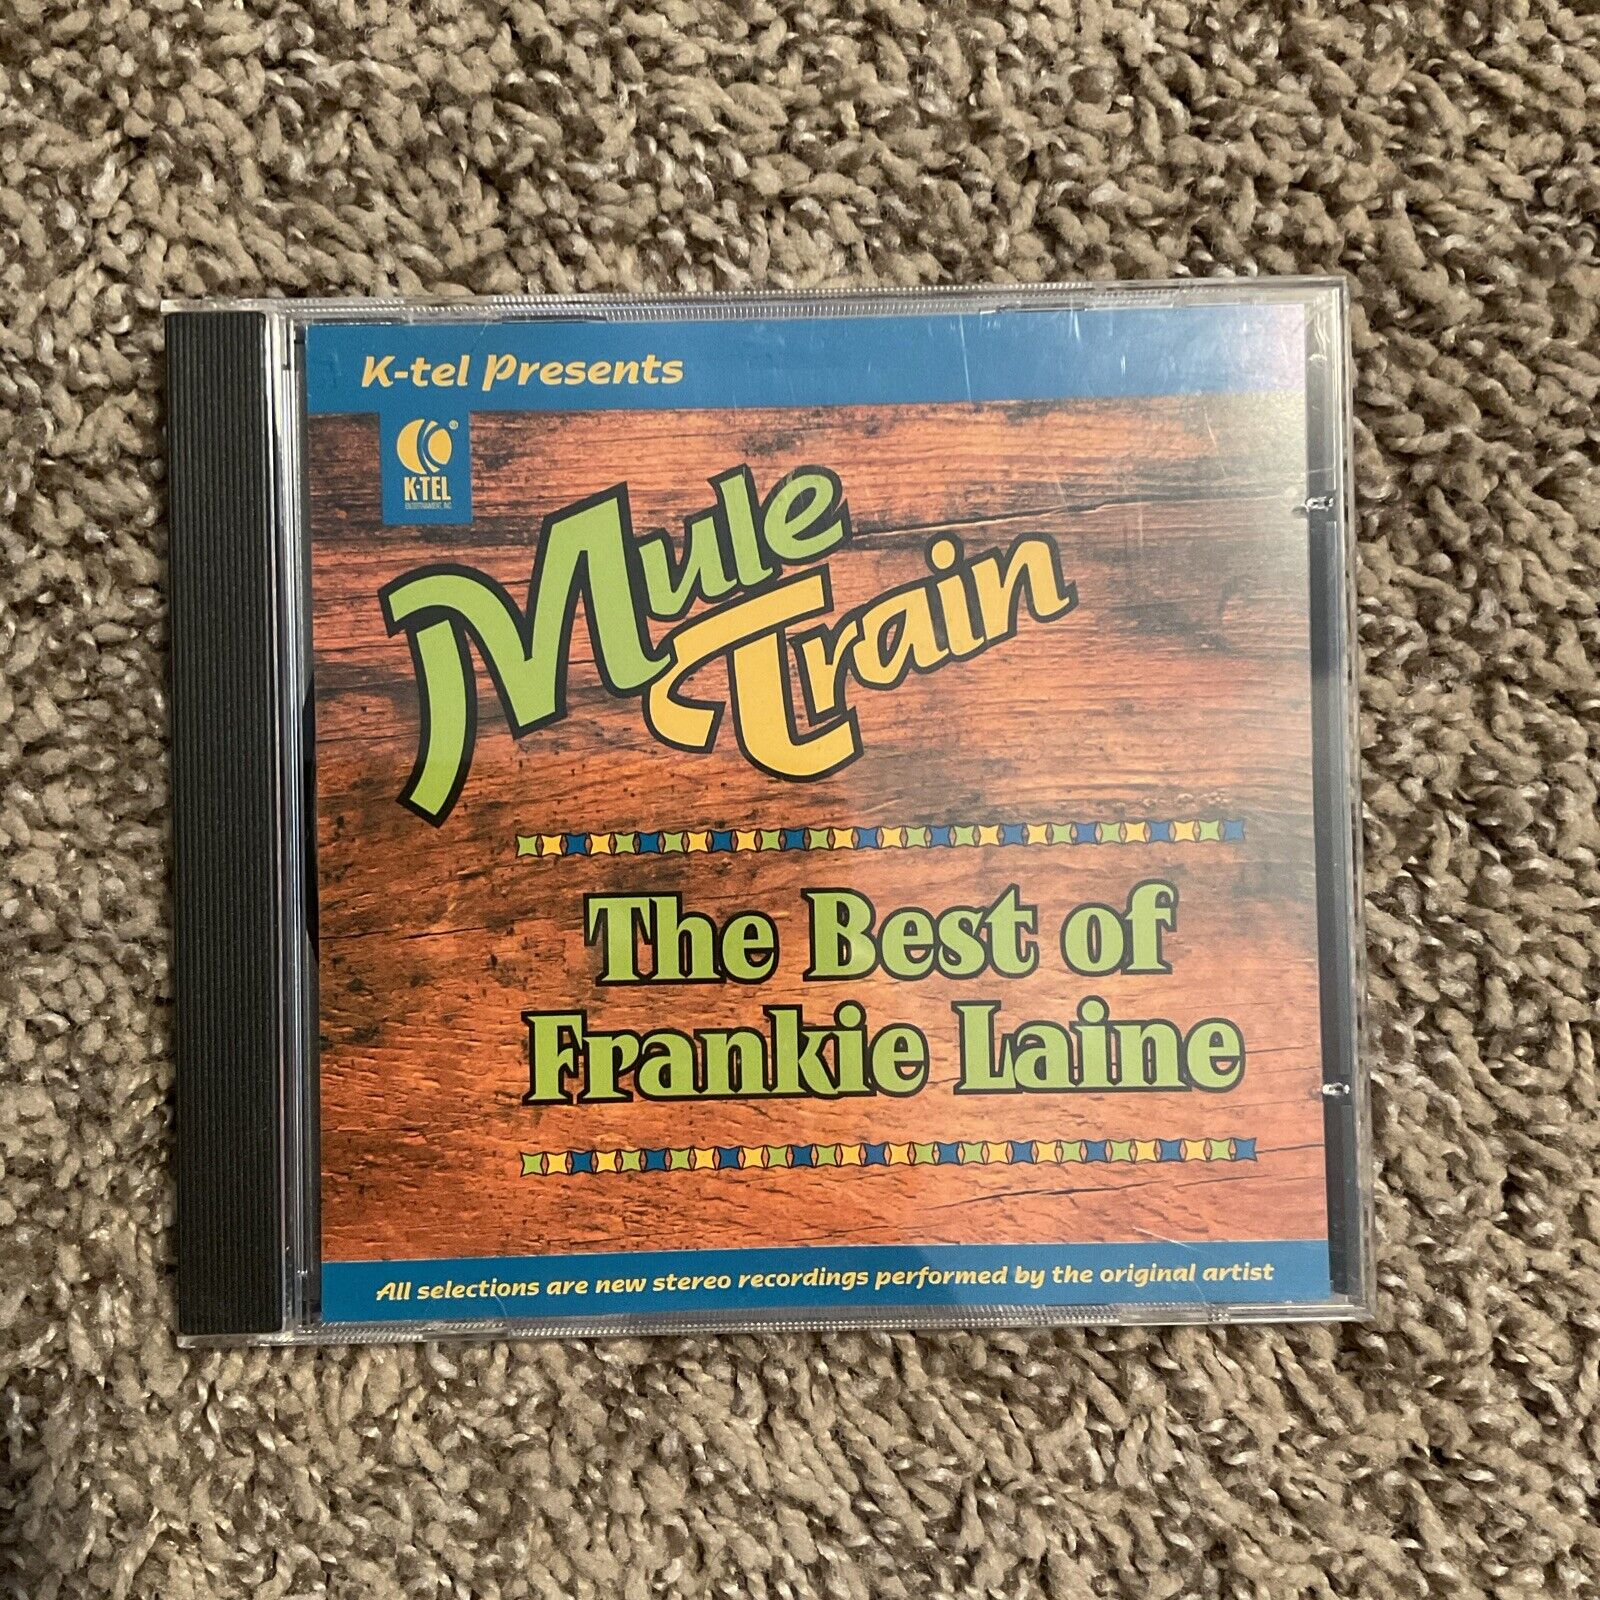 Mule Train: The Best of Frankie Laine by Frankie Laine (CD, 2005) B13